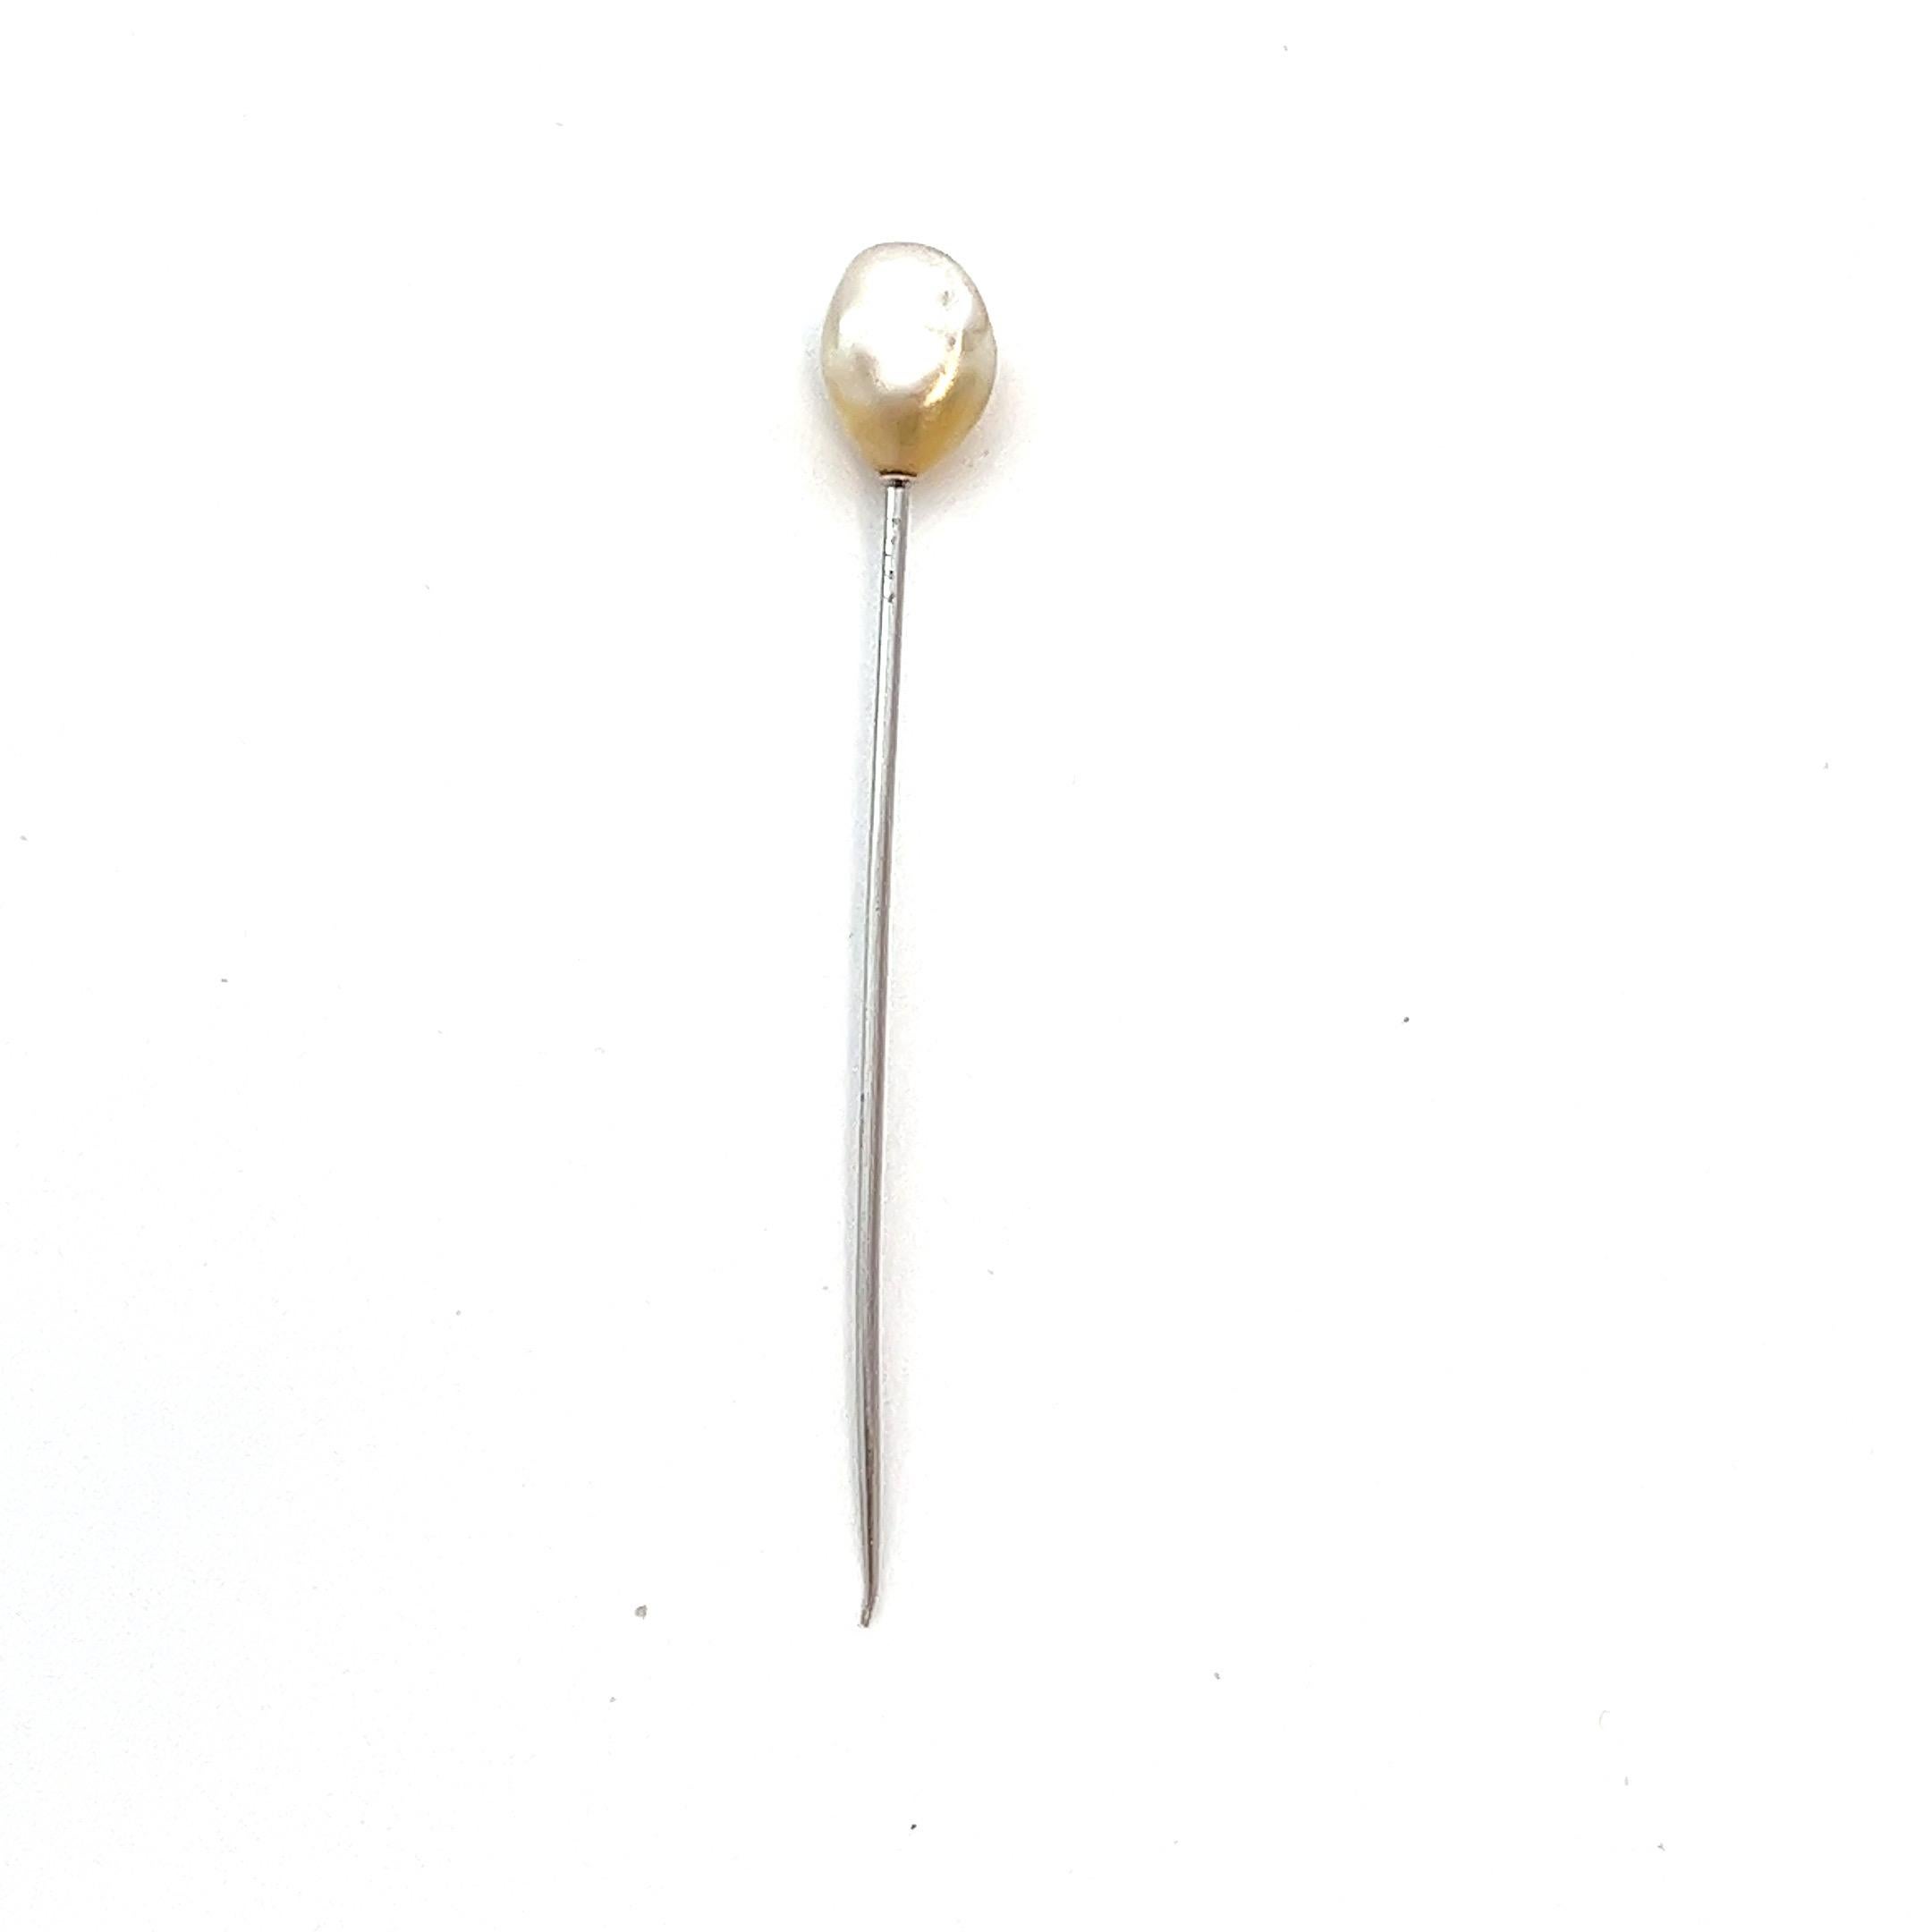 Antique Platinum Stick Pin with Natural Pearl - Late 19th Century Elegance

Description:

Overview:
Embrace the charm of the late 19th century with this exquisite antique stick pin, crafted in platinum (acid tested to be 900 platinum). This elegant